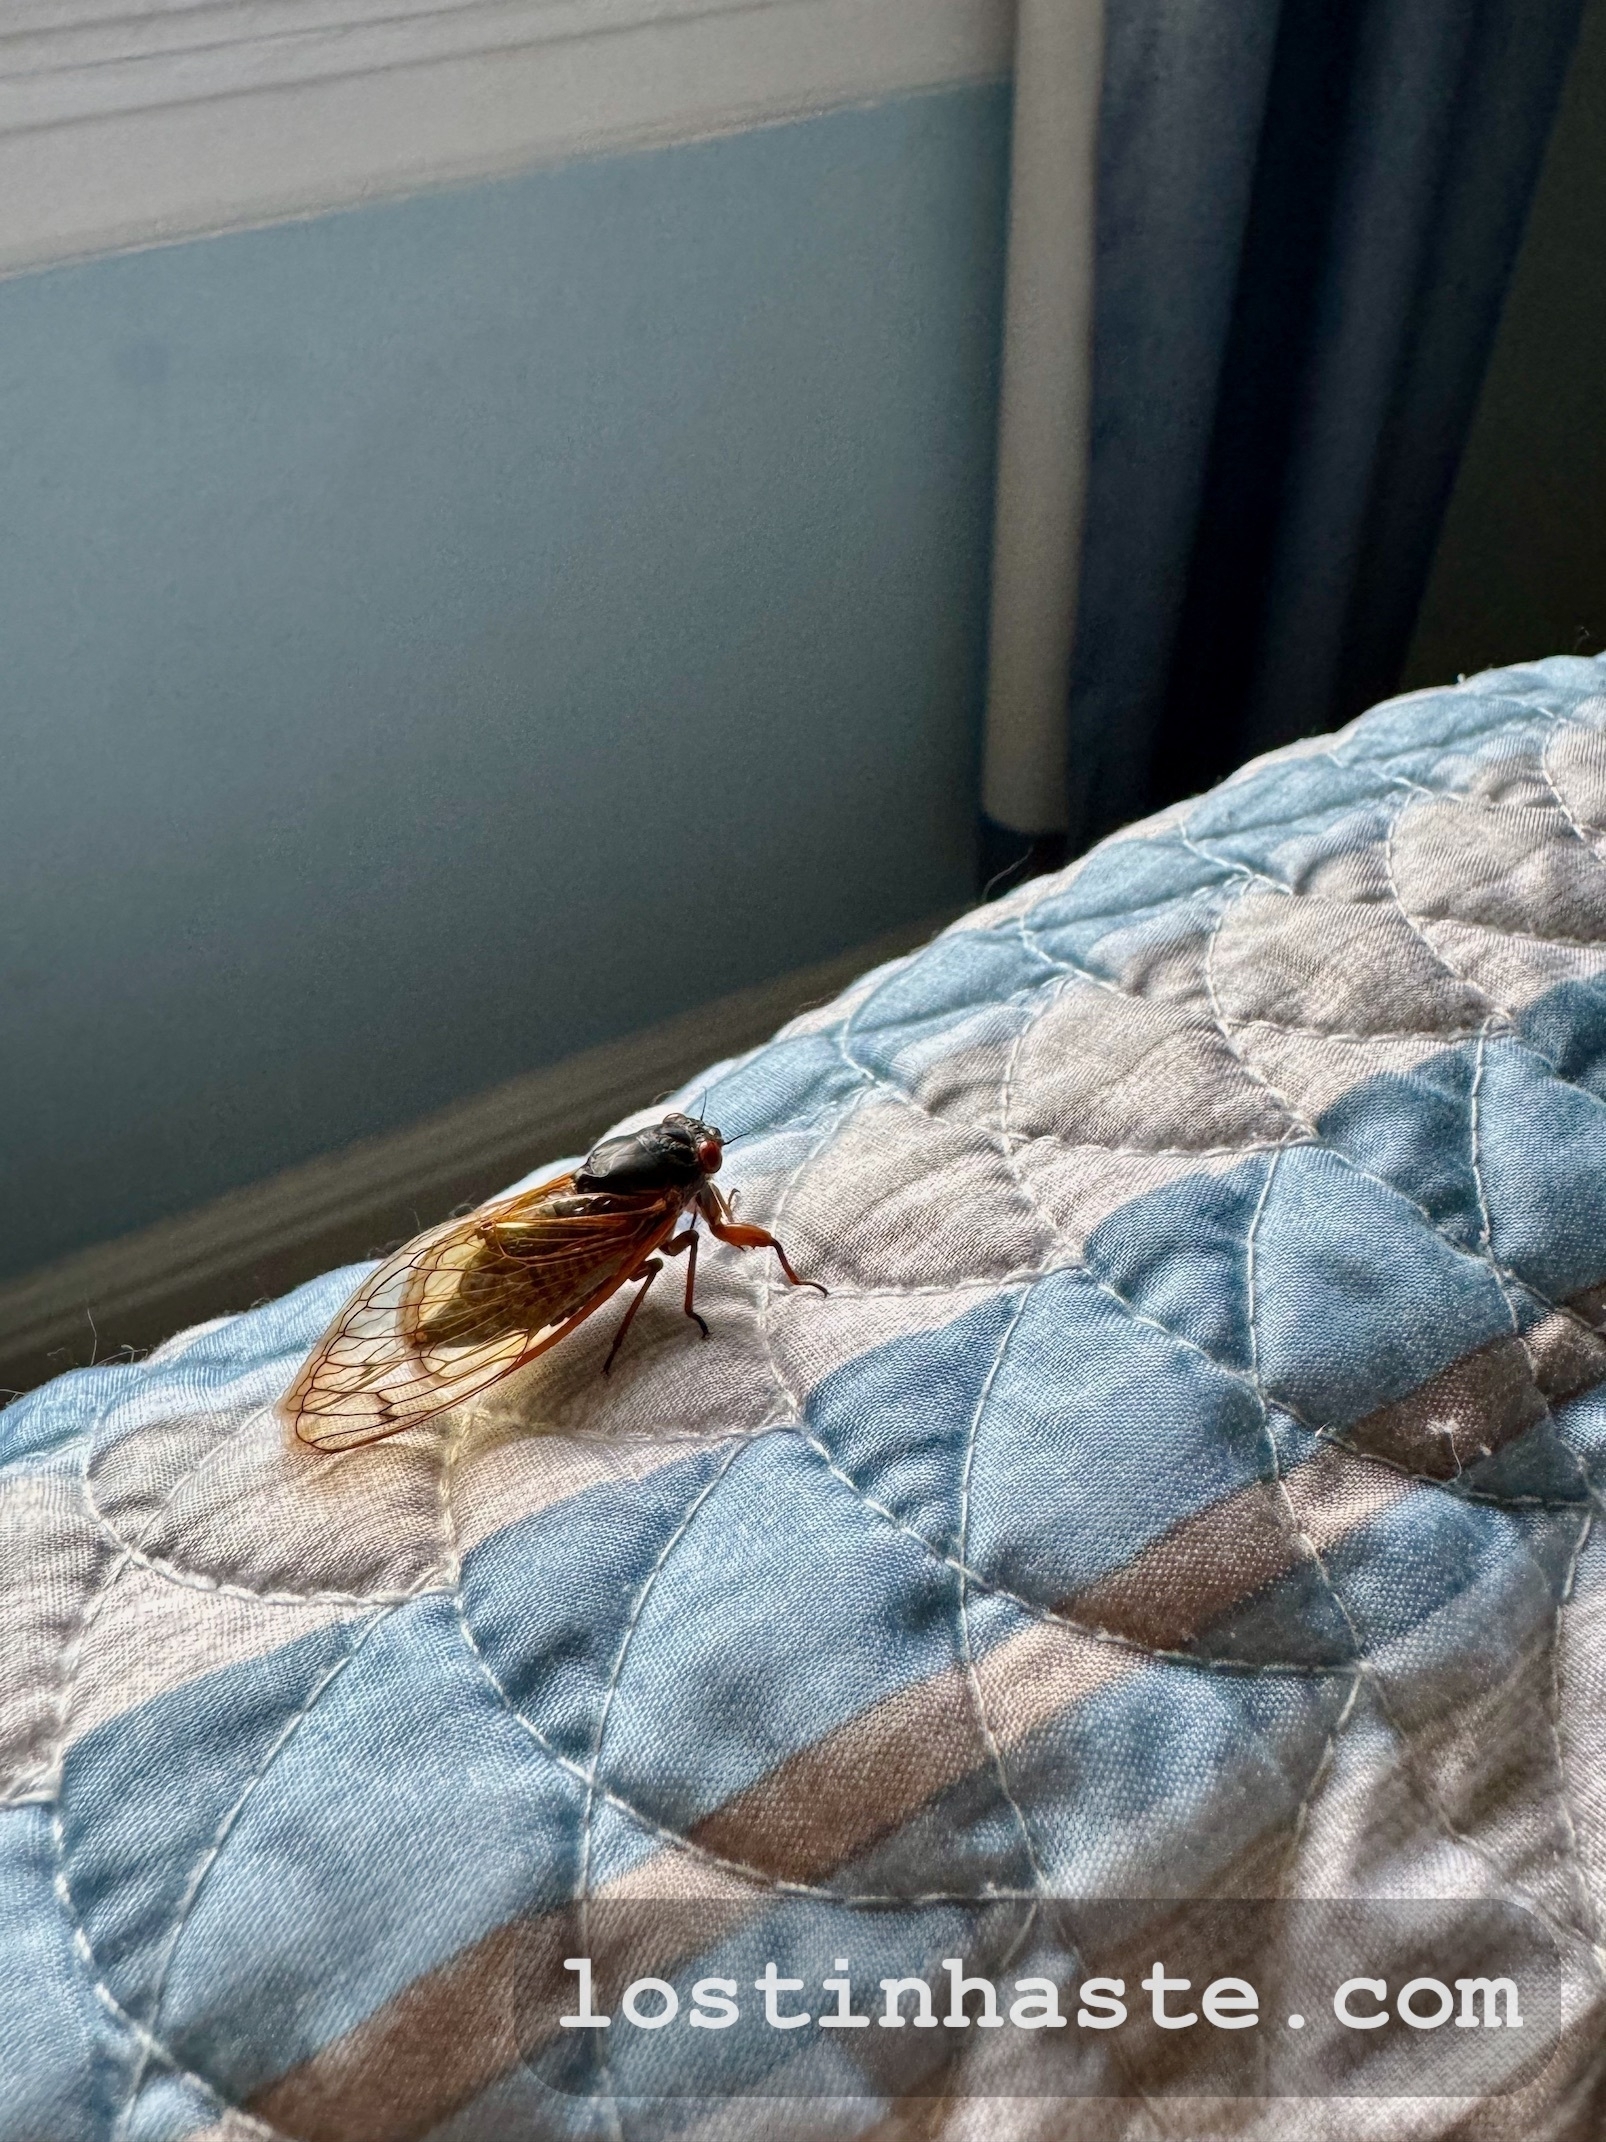 A cicada rests on a textured blue and white quilt near a window with a dark curtain. The website 'lostinhaste.com' is overlaid on the image.